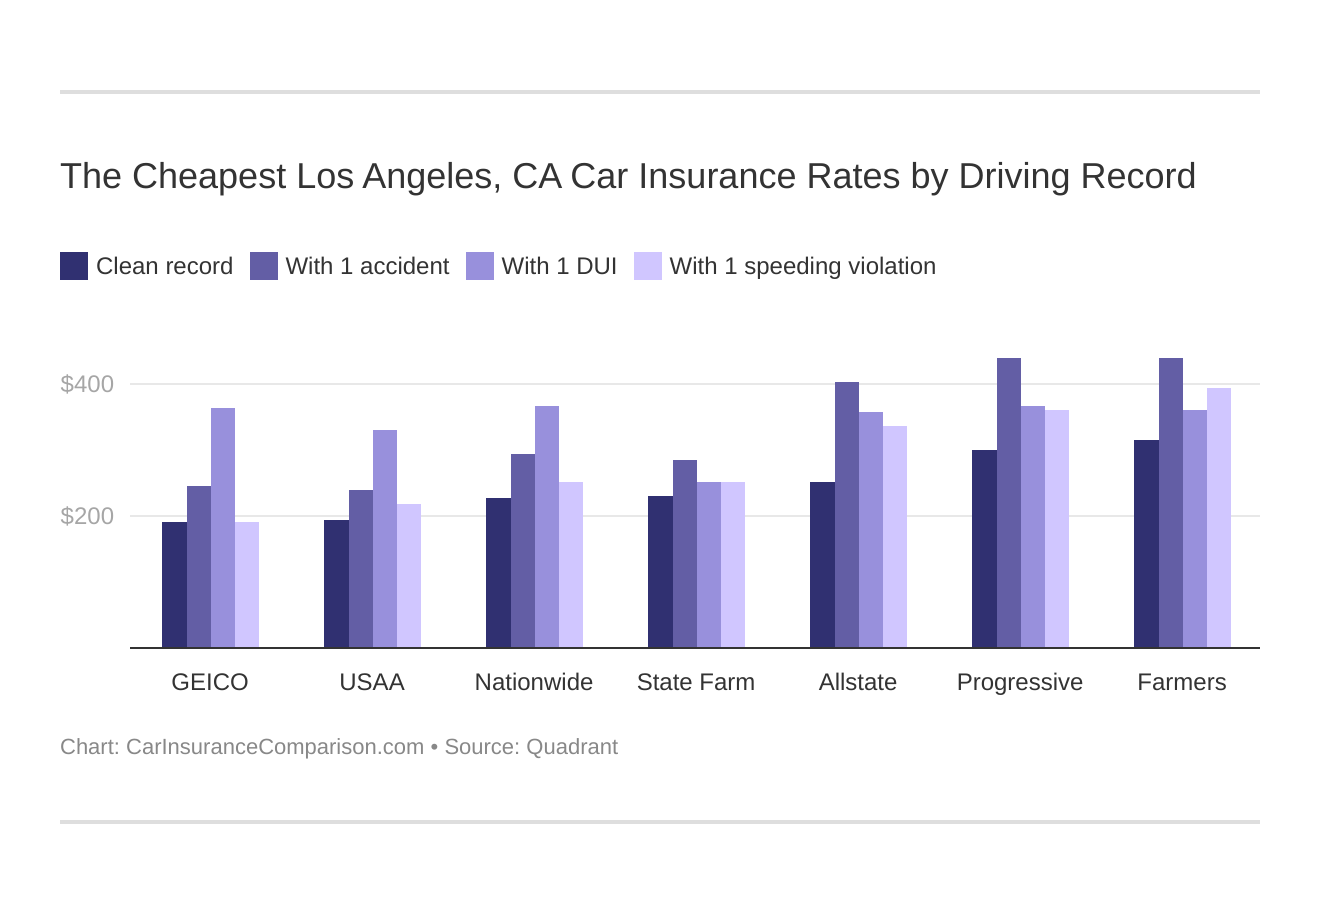 The Cheapest Los Angeles, CA Car Insurance Rates by Driving Record